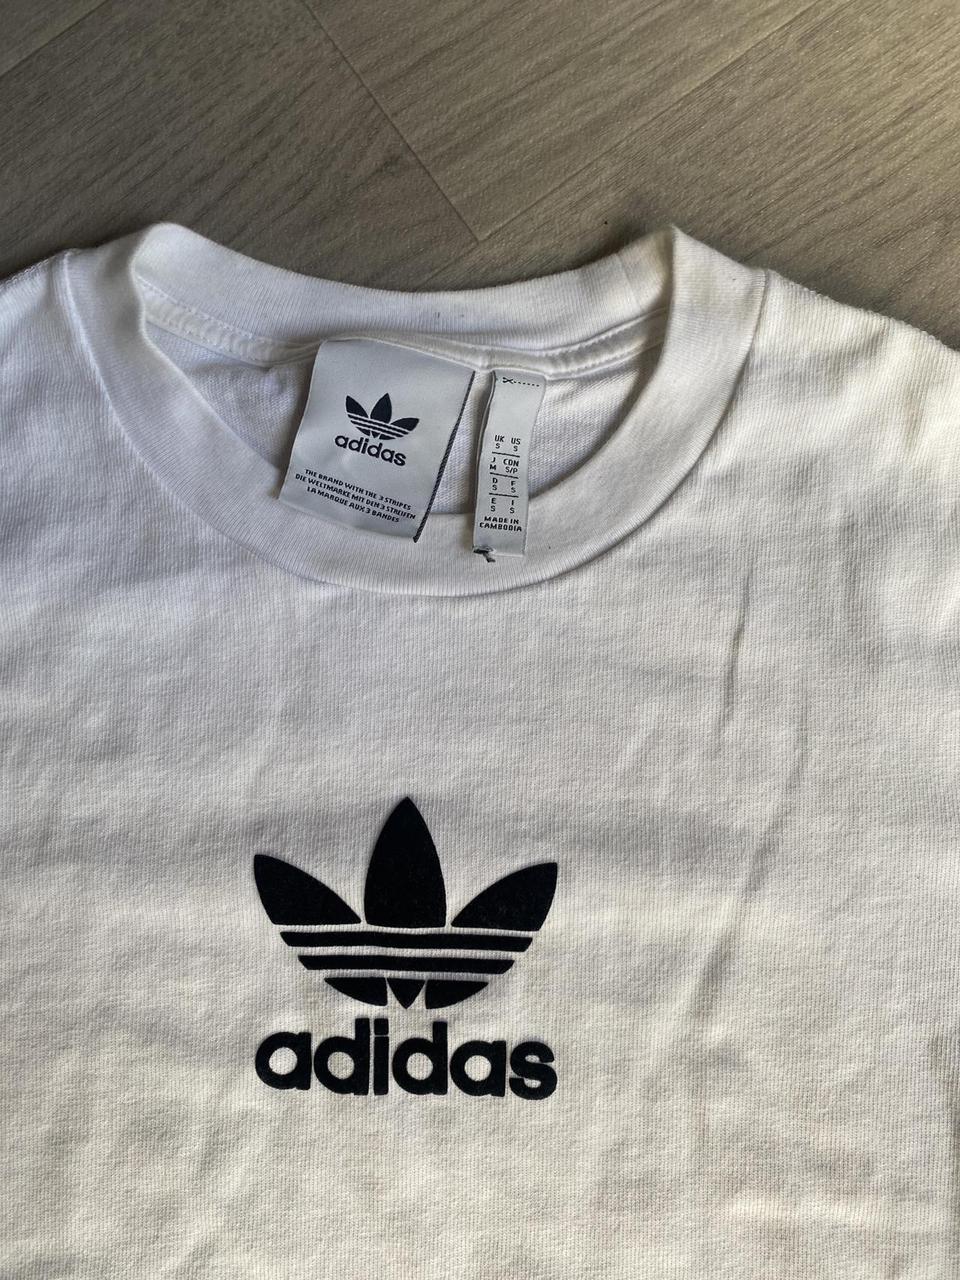 Adidas t shirt Size small and fits tts Velour... - Depop